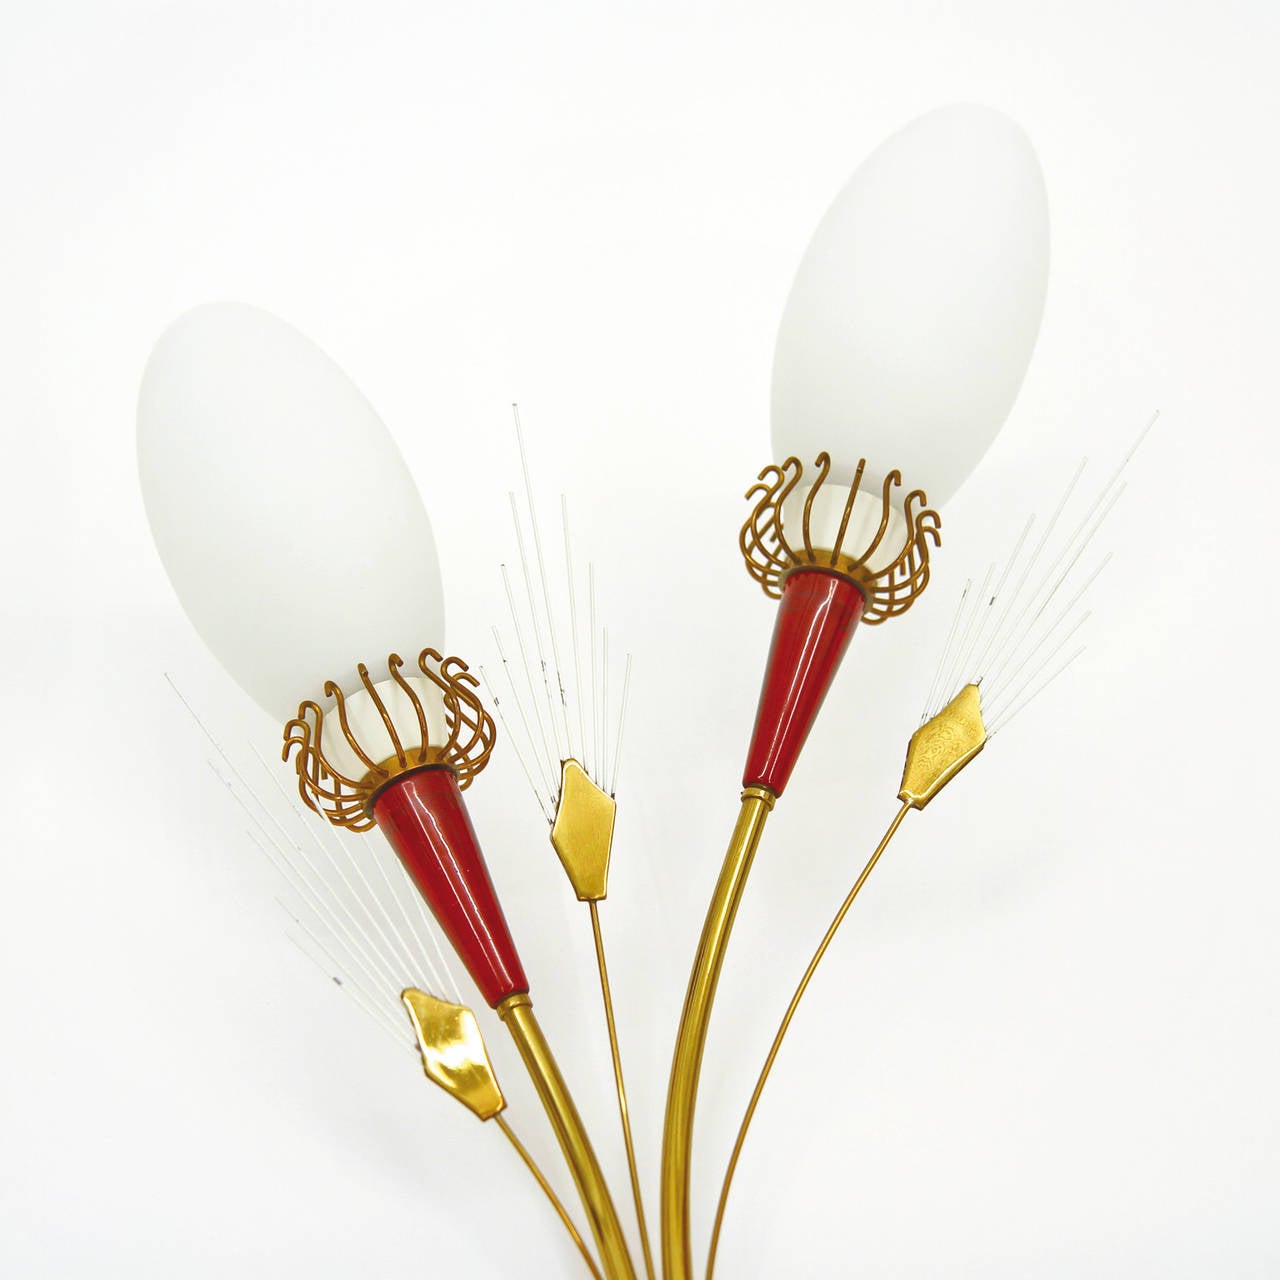 Delightful 1950s French Modern wall lights by Lunel in the shape of a flower bouquet. Brass hardware with ruby colored Lucite and frosted glass shades. Very good vintage condition with some loss of paint on the lacquered 